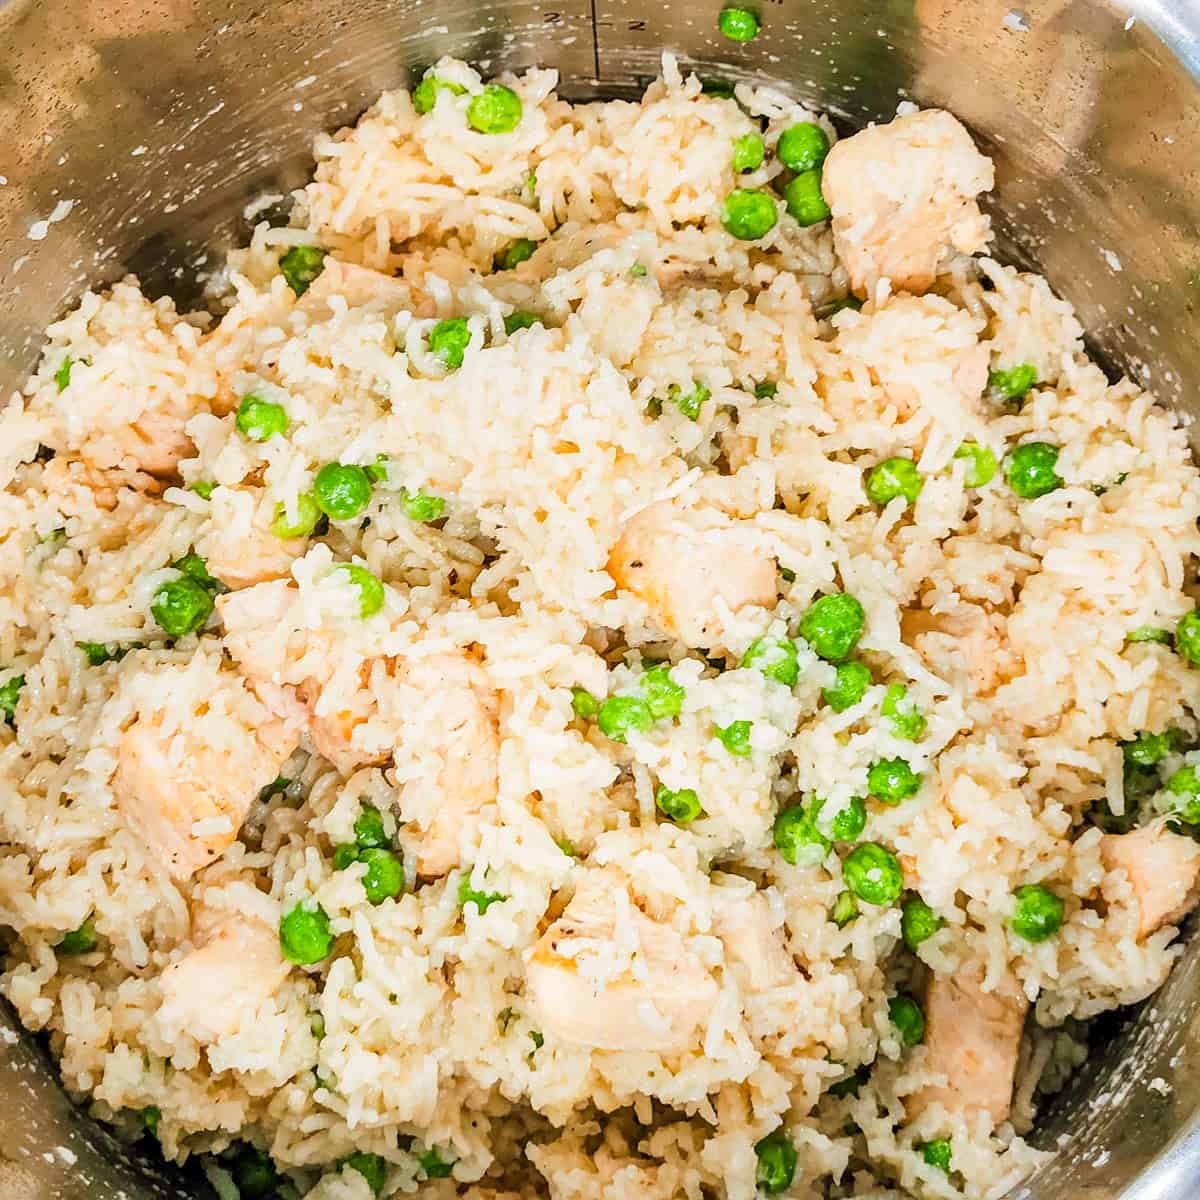 The finished chicken and rice is shown in the Instant Pot. 